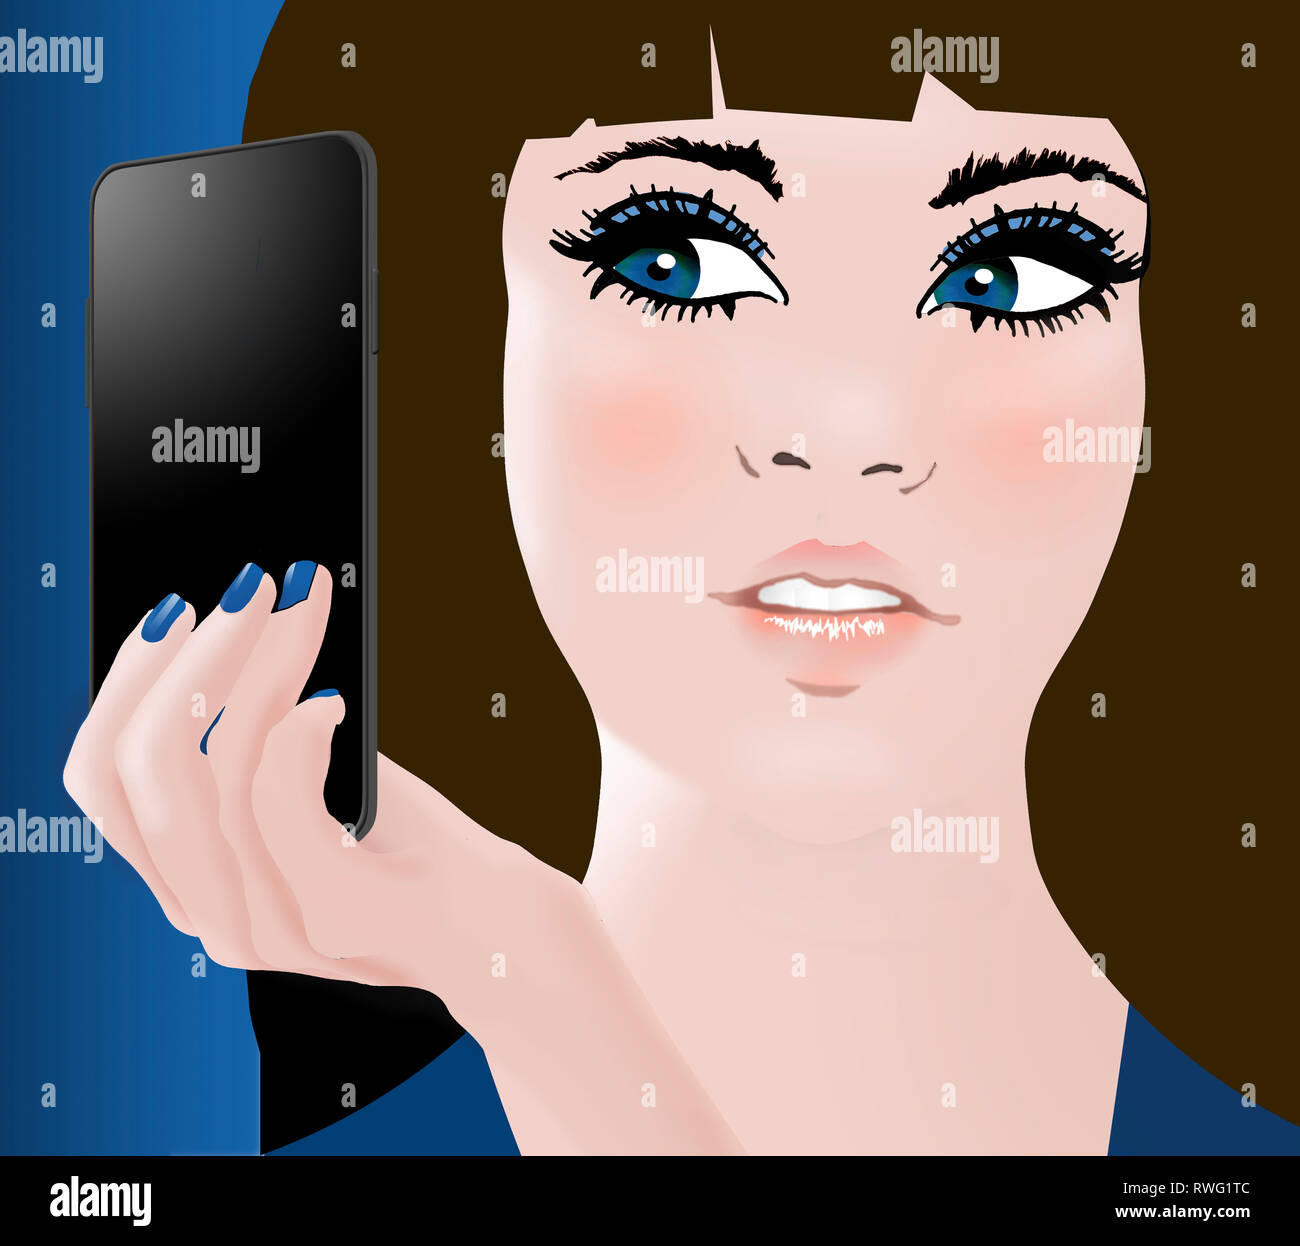 A teen girl looks at her cell phone that is emitting the light that illuminates her face. This is an illustration. Stock Photo